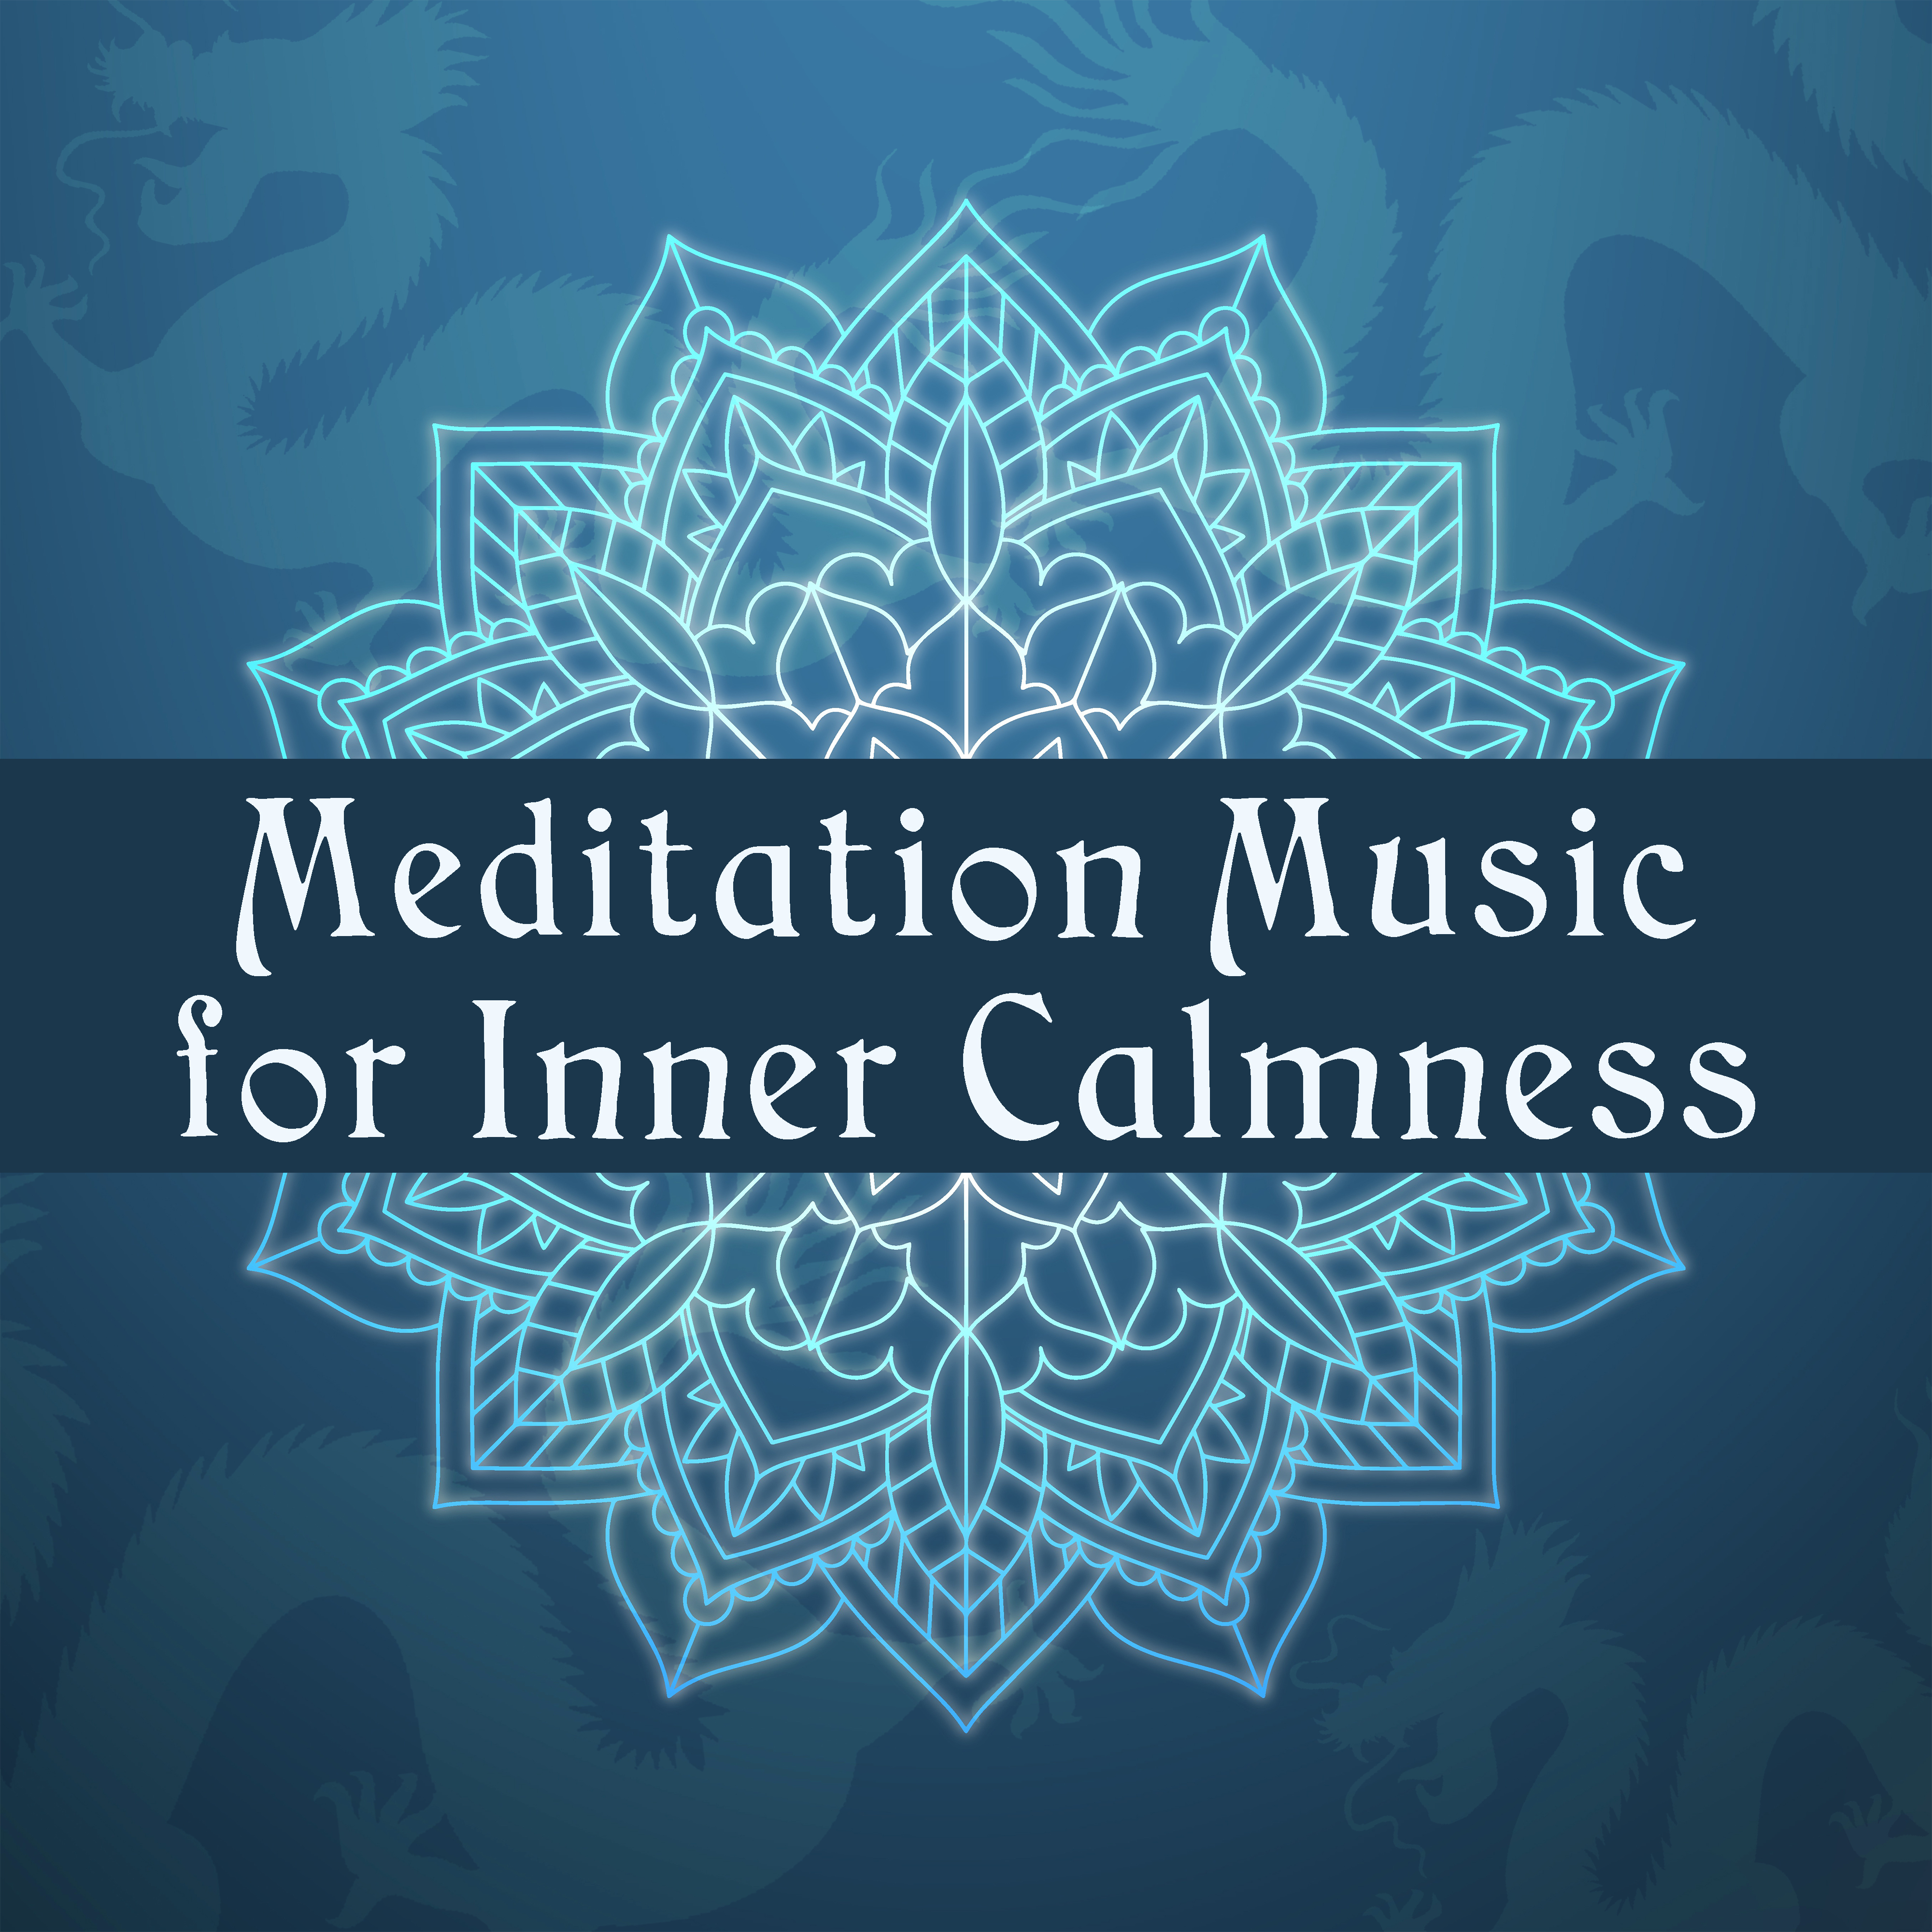 Meditation Music for Inner Calmness – Calming Sounds for Relaxation, Stress Relief with New Age Sounds, Mind Control, Meditation Melodies